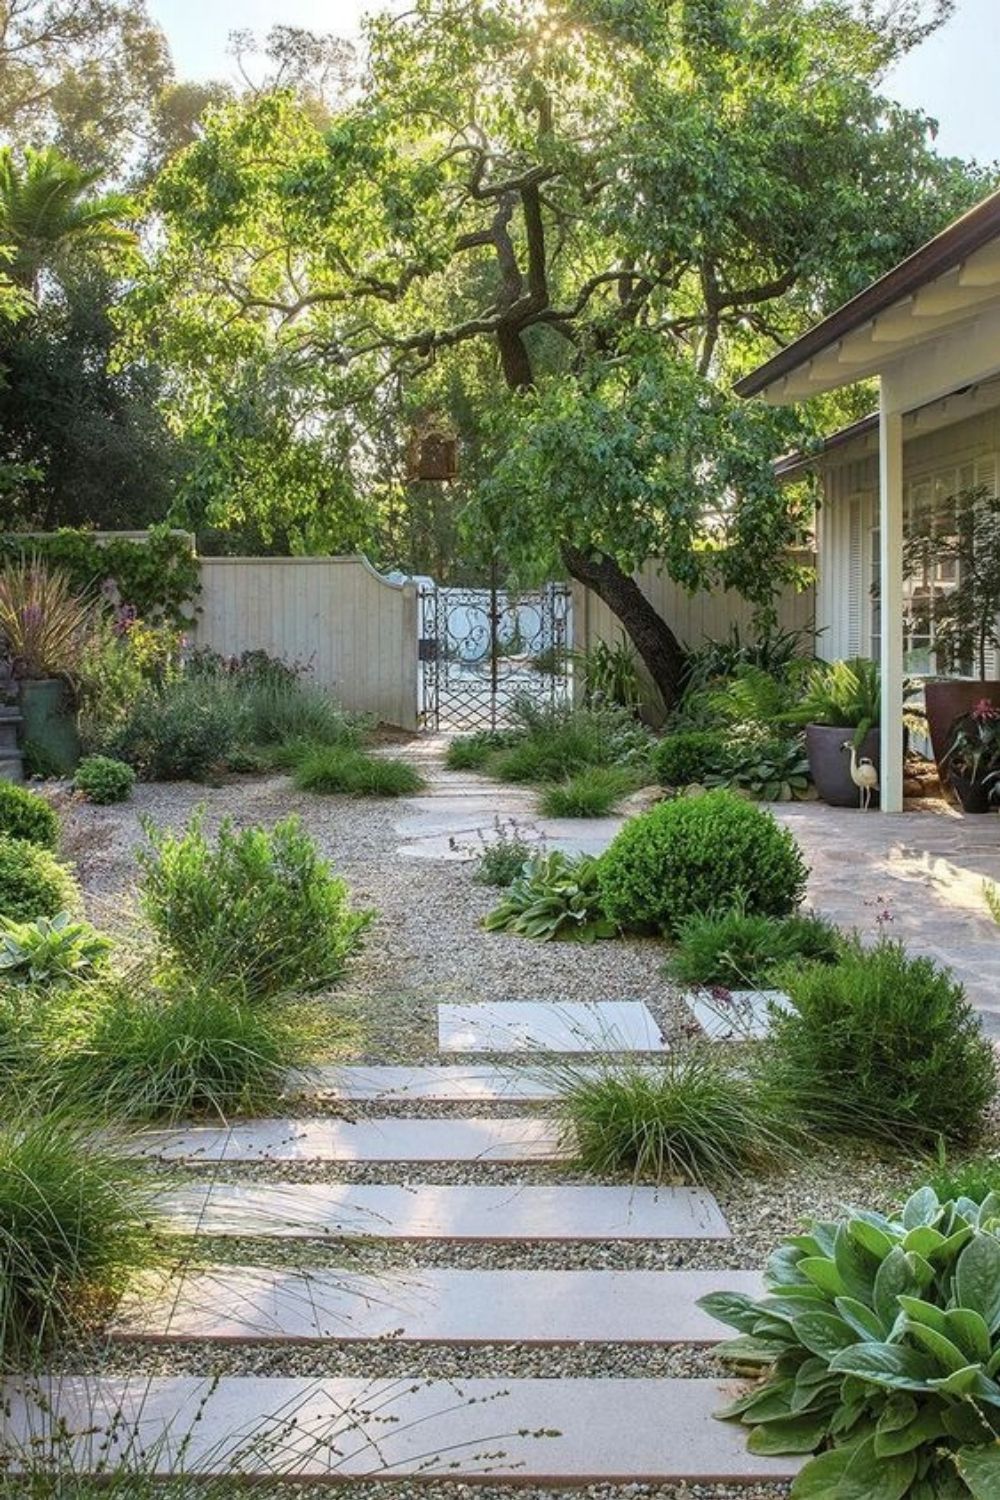 Creating an environmentally friendly backyard with xeriscape landscaping